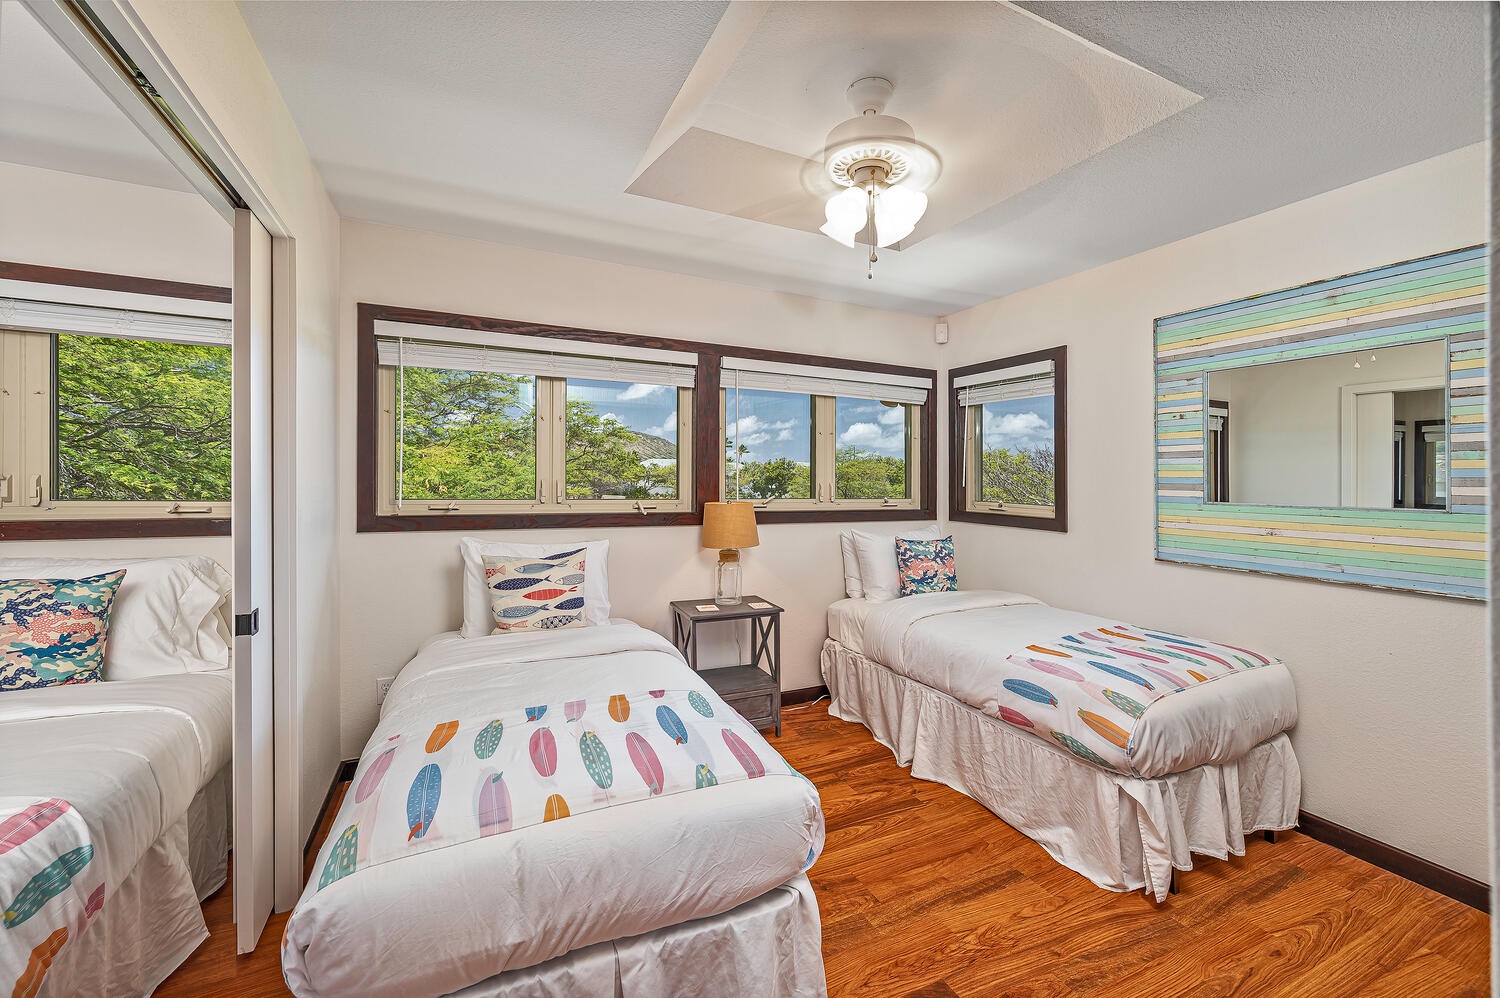 Honolulu Vacation Rentals, Nani Wai - Bedroom 5, two standard twins which can be converted to a king upon request. Connected to bedroom 4.